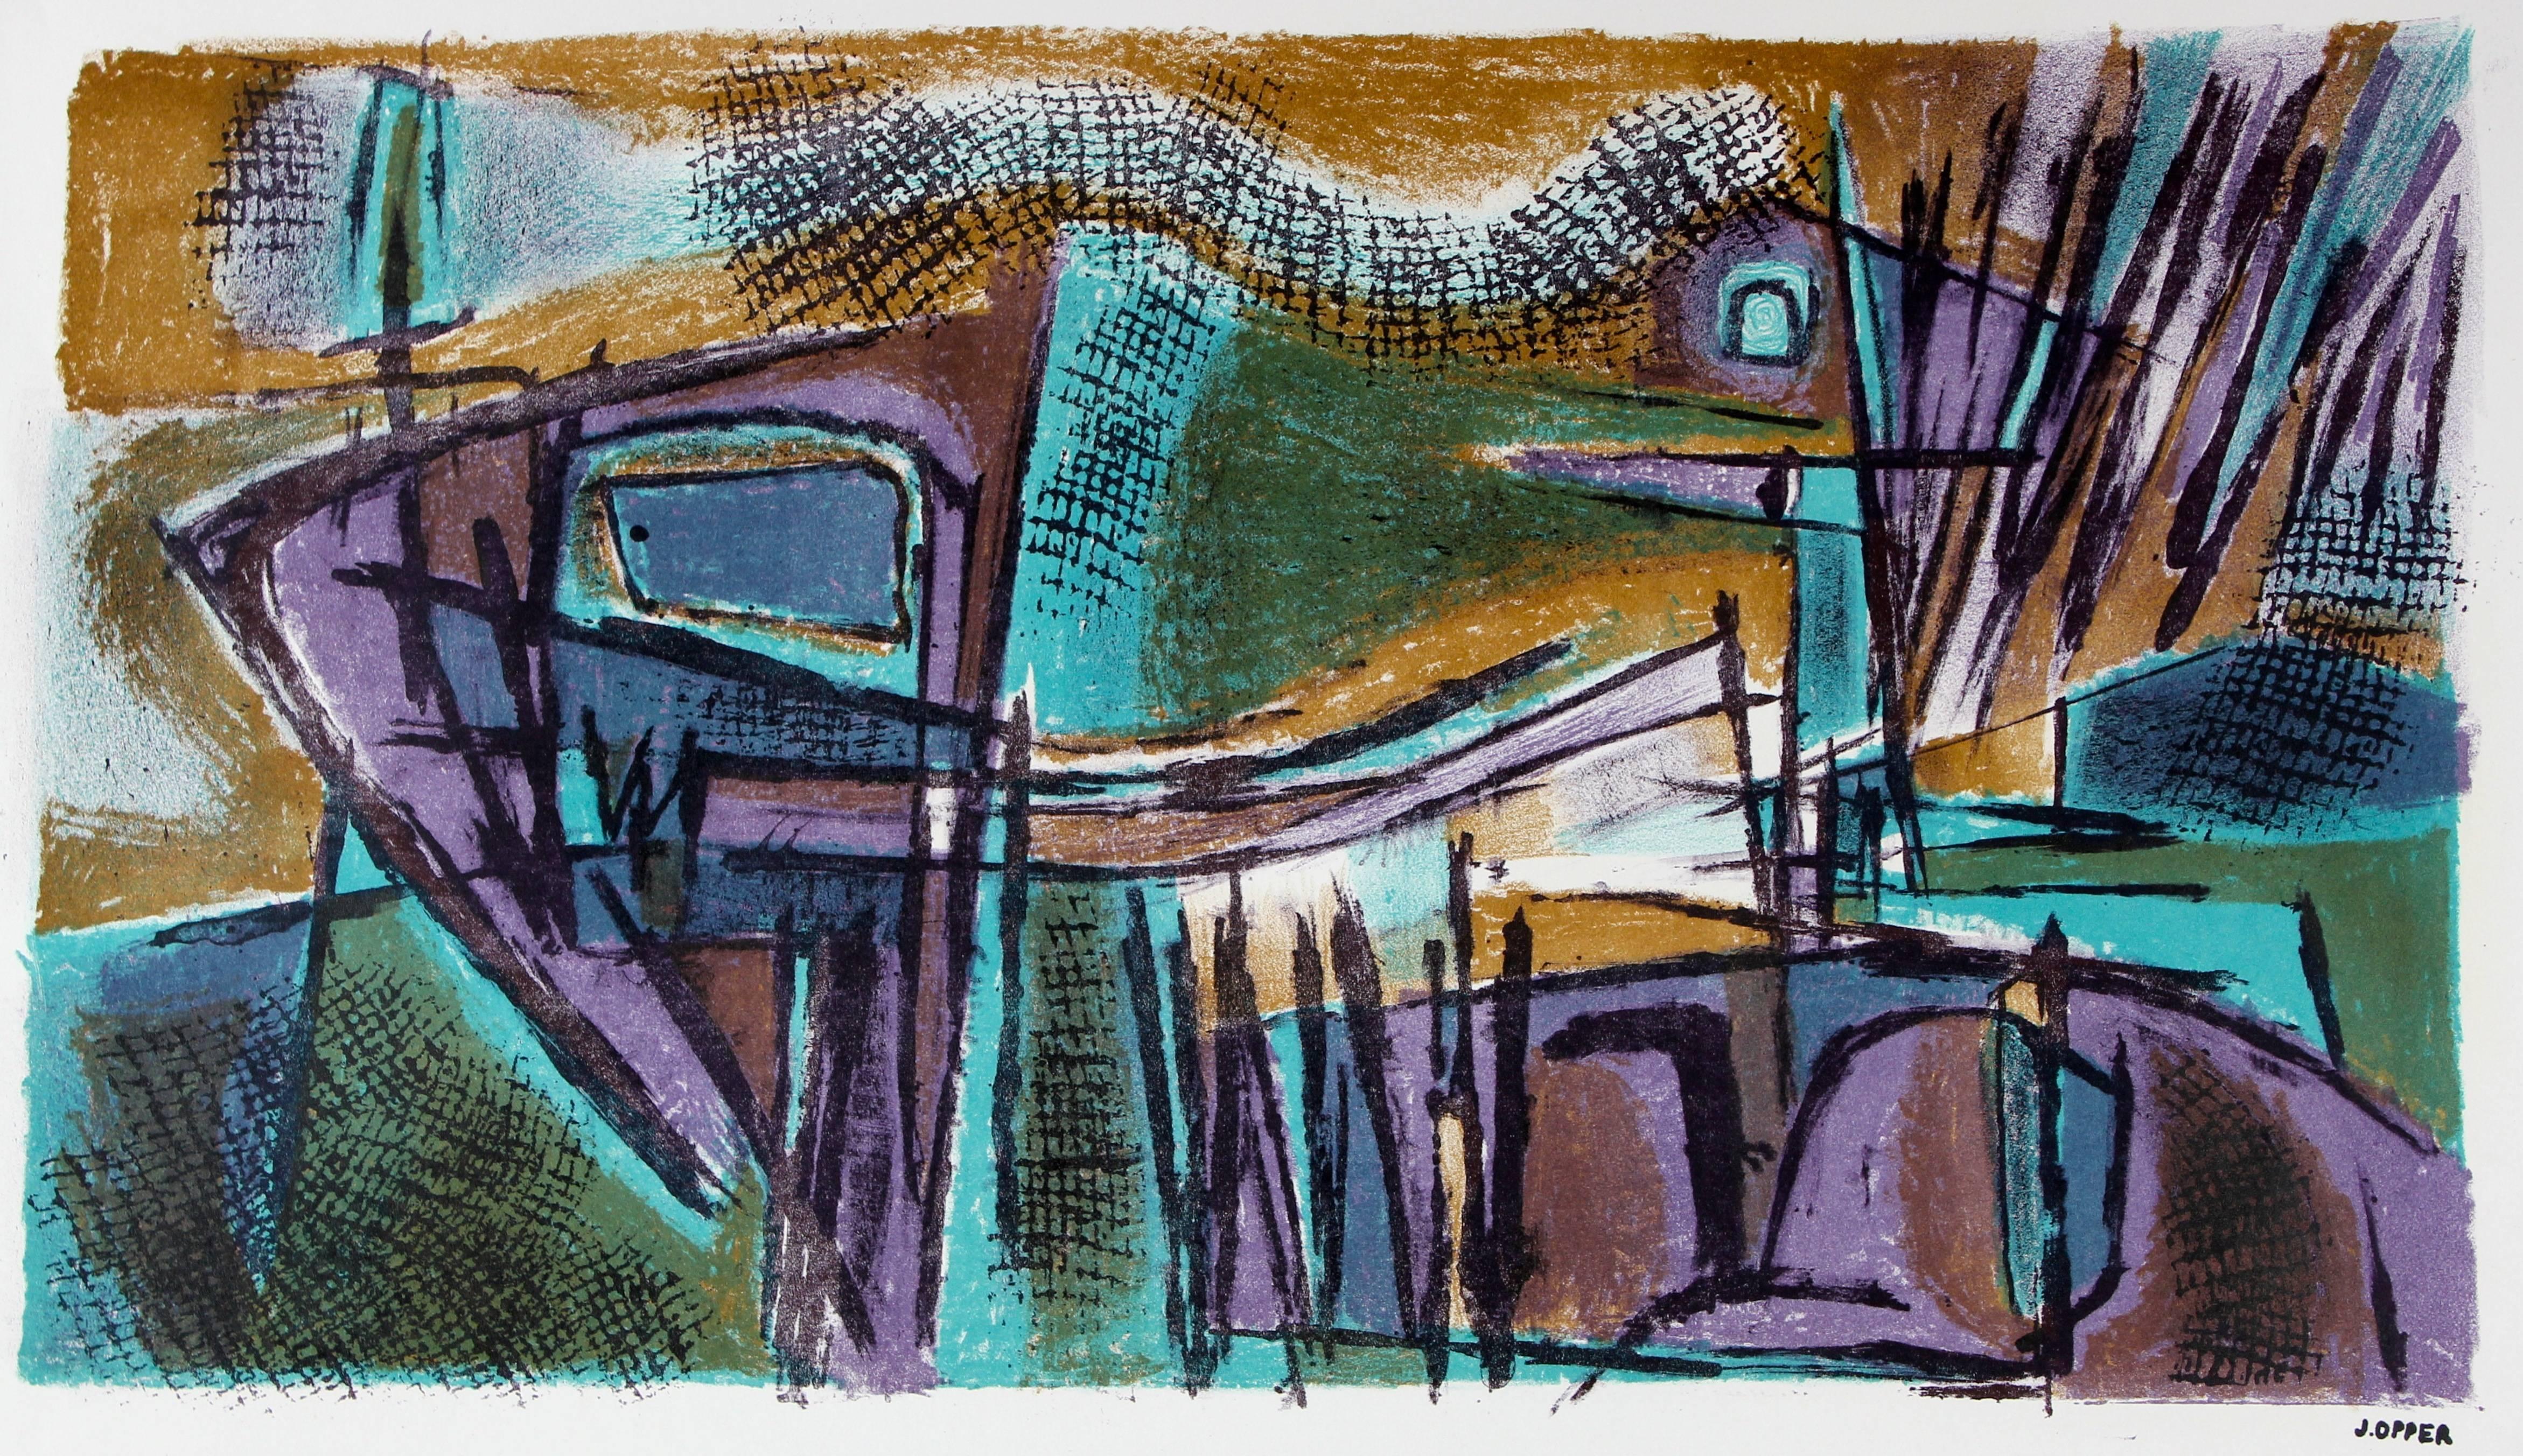 Jerry Opper Abstract Print - Abstracted Landscape Lithograph, Circa 1950s